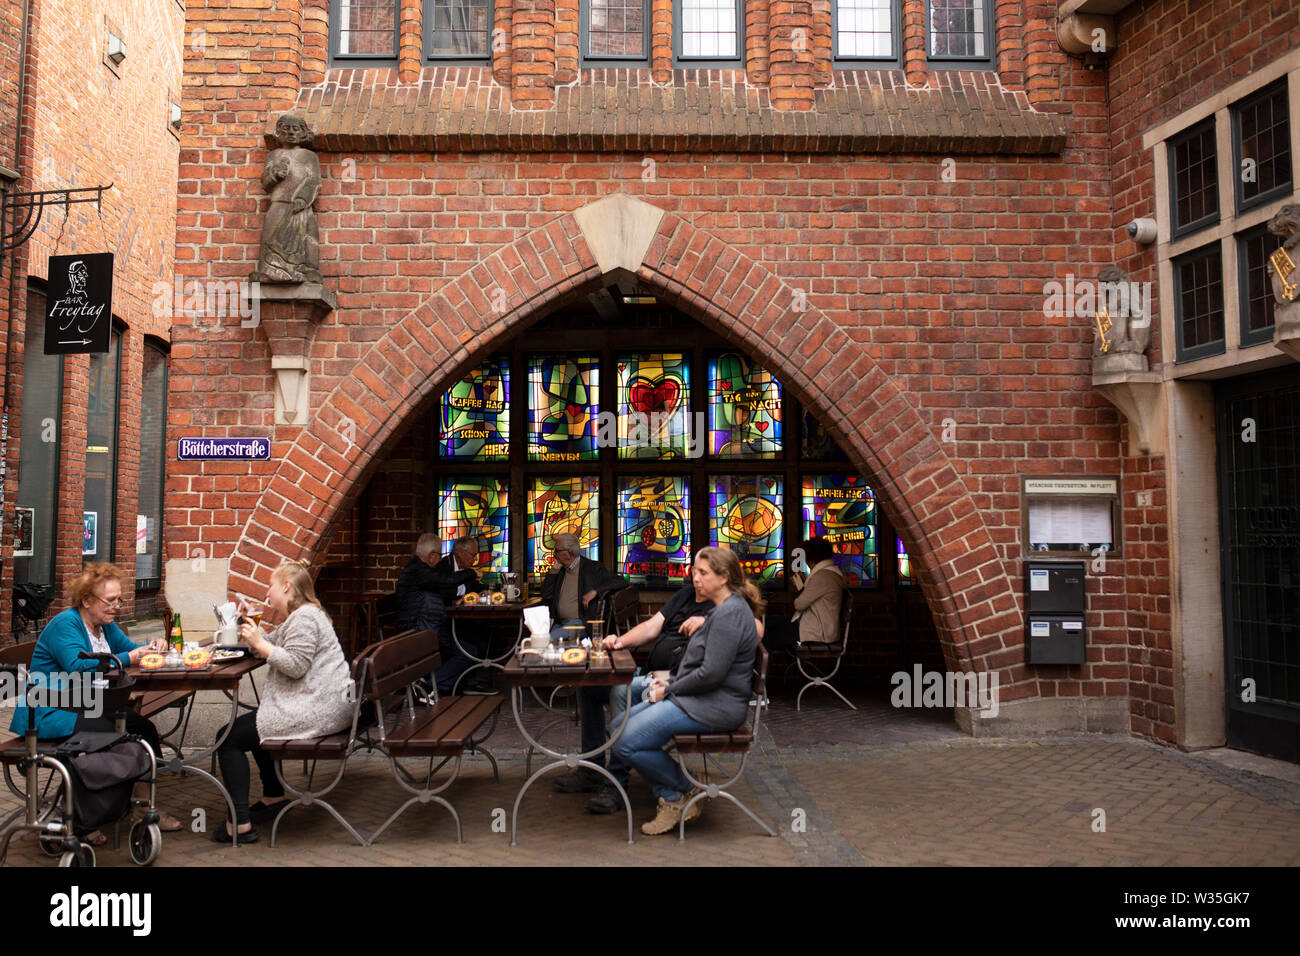 Stained glass windows and outdoor tables with people eating and drinking at Bar Freytag on Böttcherstrasse in central Bremen, Germany. Stock Photo